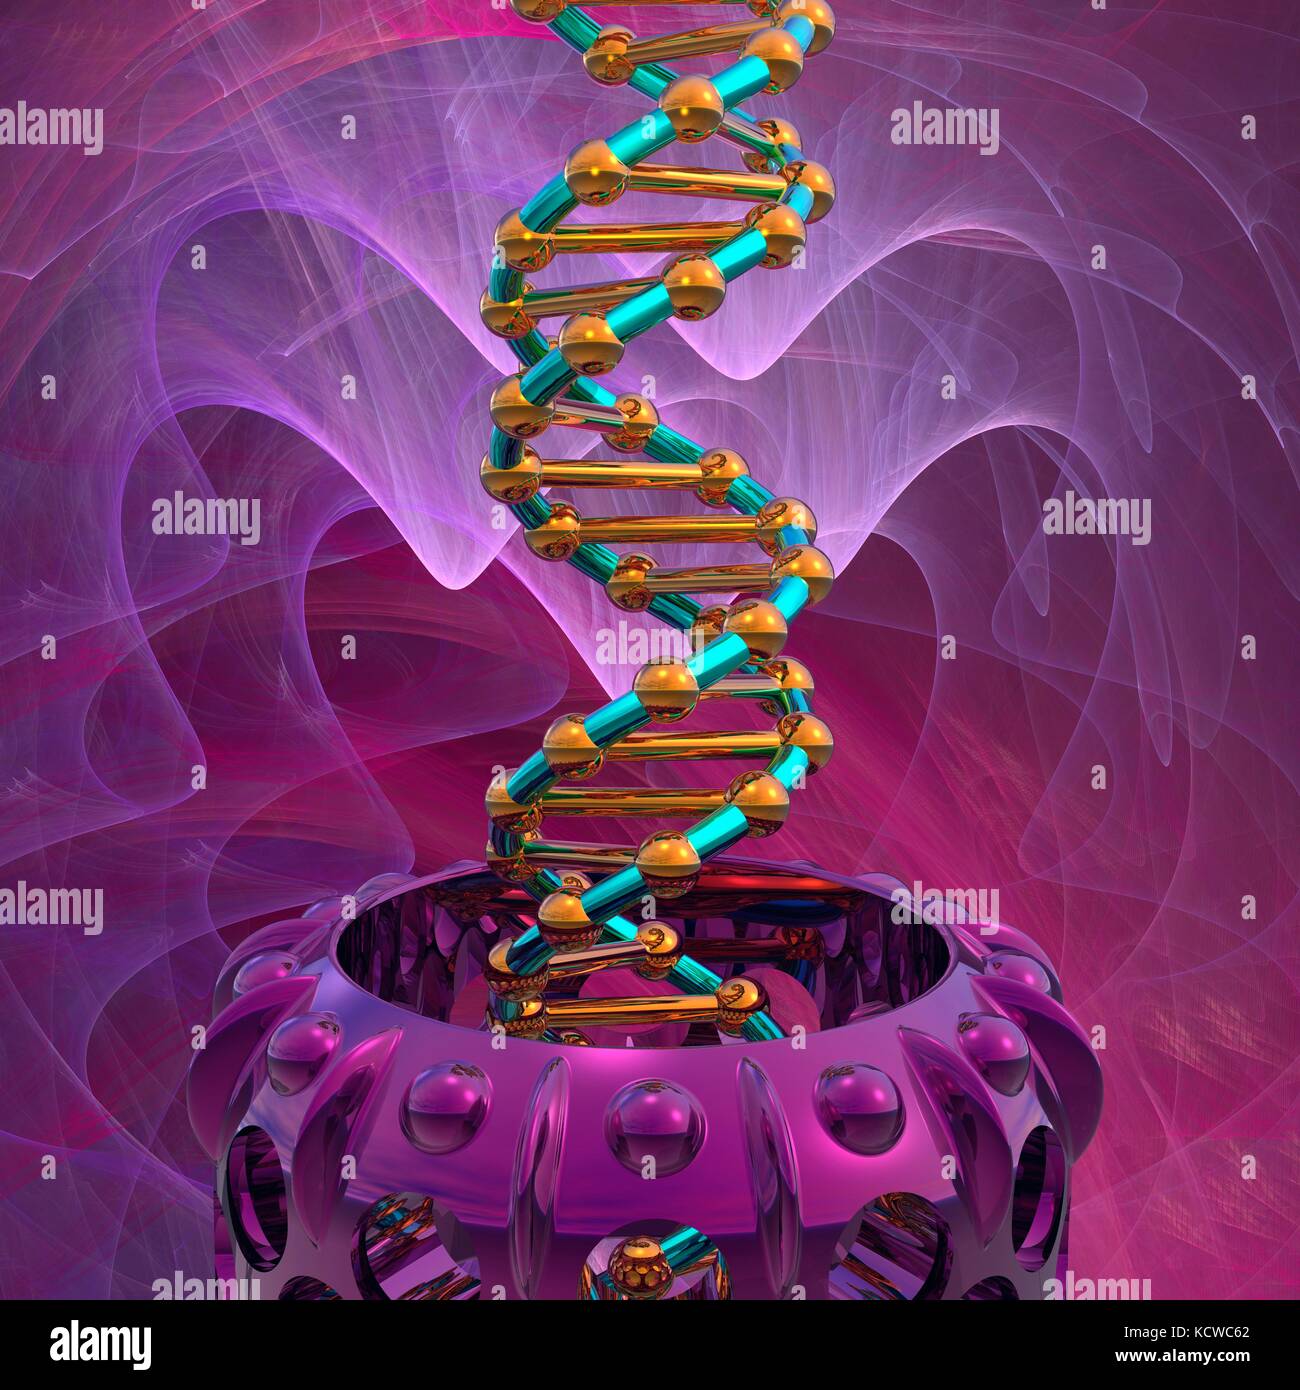 Conceptual illustration of a double stranded DNA (deoxyribonucleic acid) molecule with DNA generating or editing equipment. DNA is composed of two strands twisted into a double helix. Each strand consists of a sugar-phosphate backbone attached to nucleotide bases. There are four bases: adenine, cytosine, guanine and thymine. The bases are joined together by hydrogen bonds. DNA contains sections called genes that encode the body's genetic information. Stock Photo